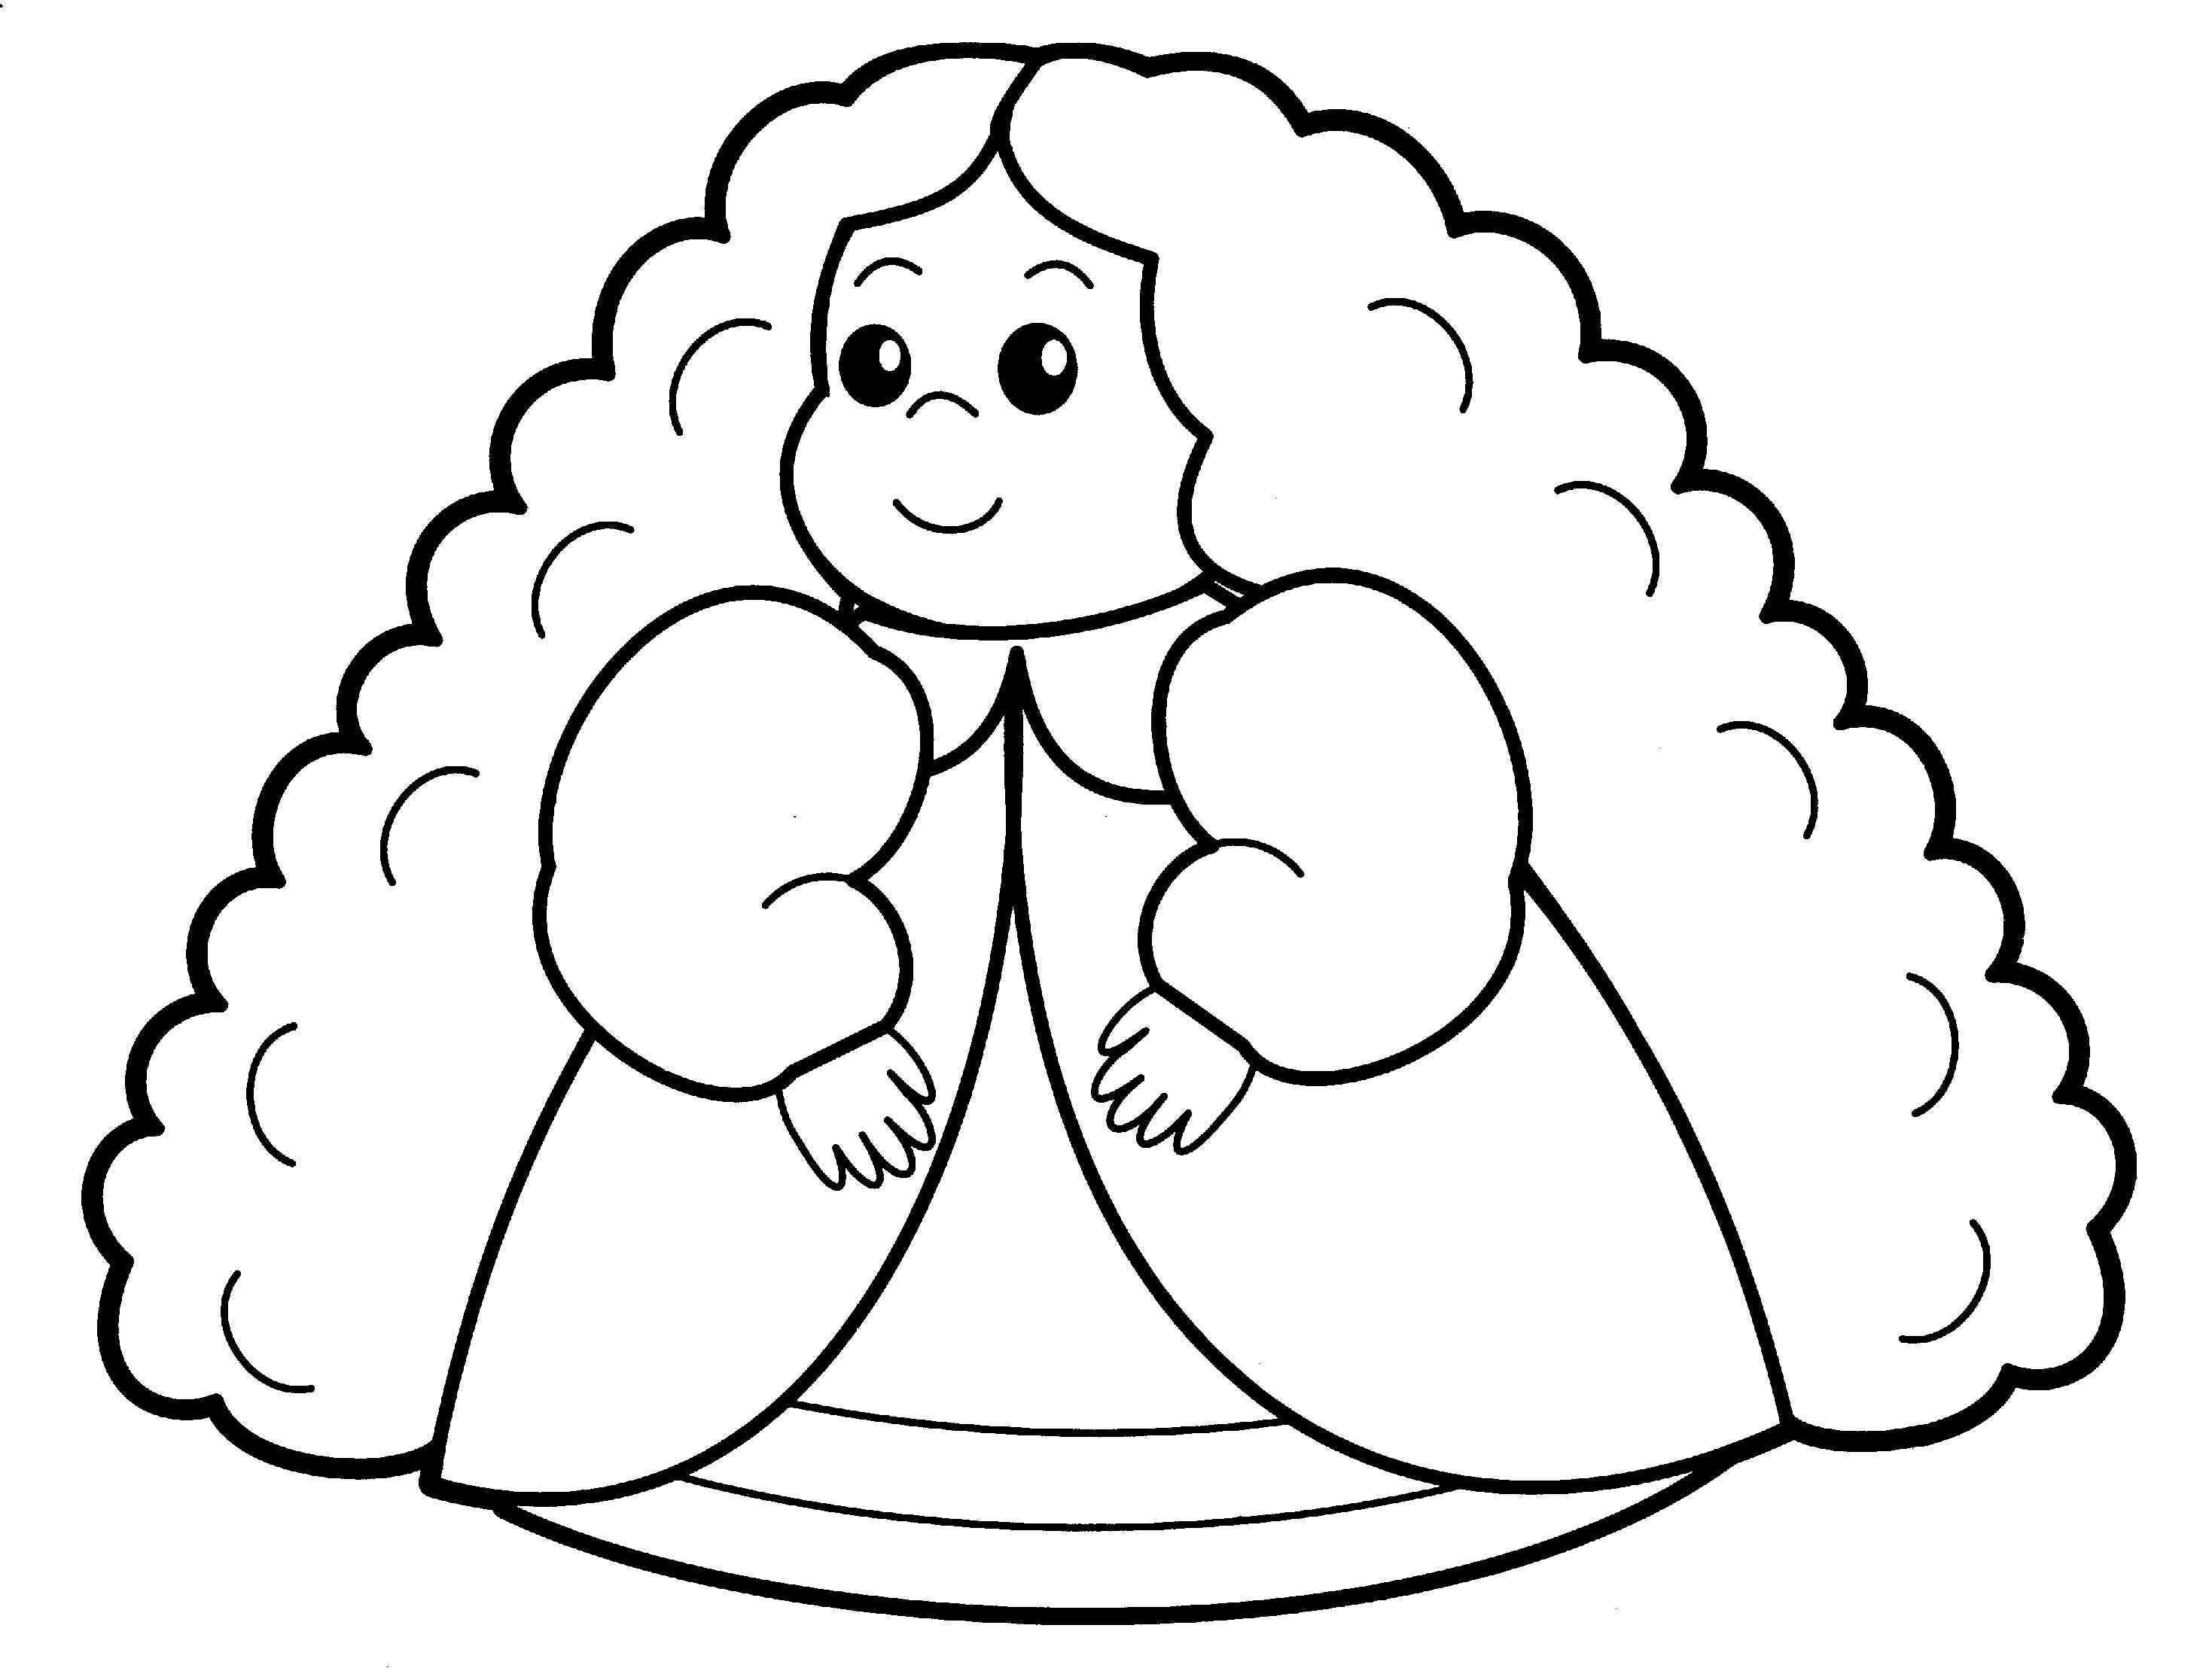 Baby People Coloring Pages - Coloring Pages For All Ages